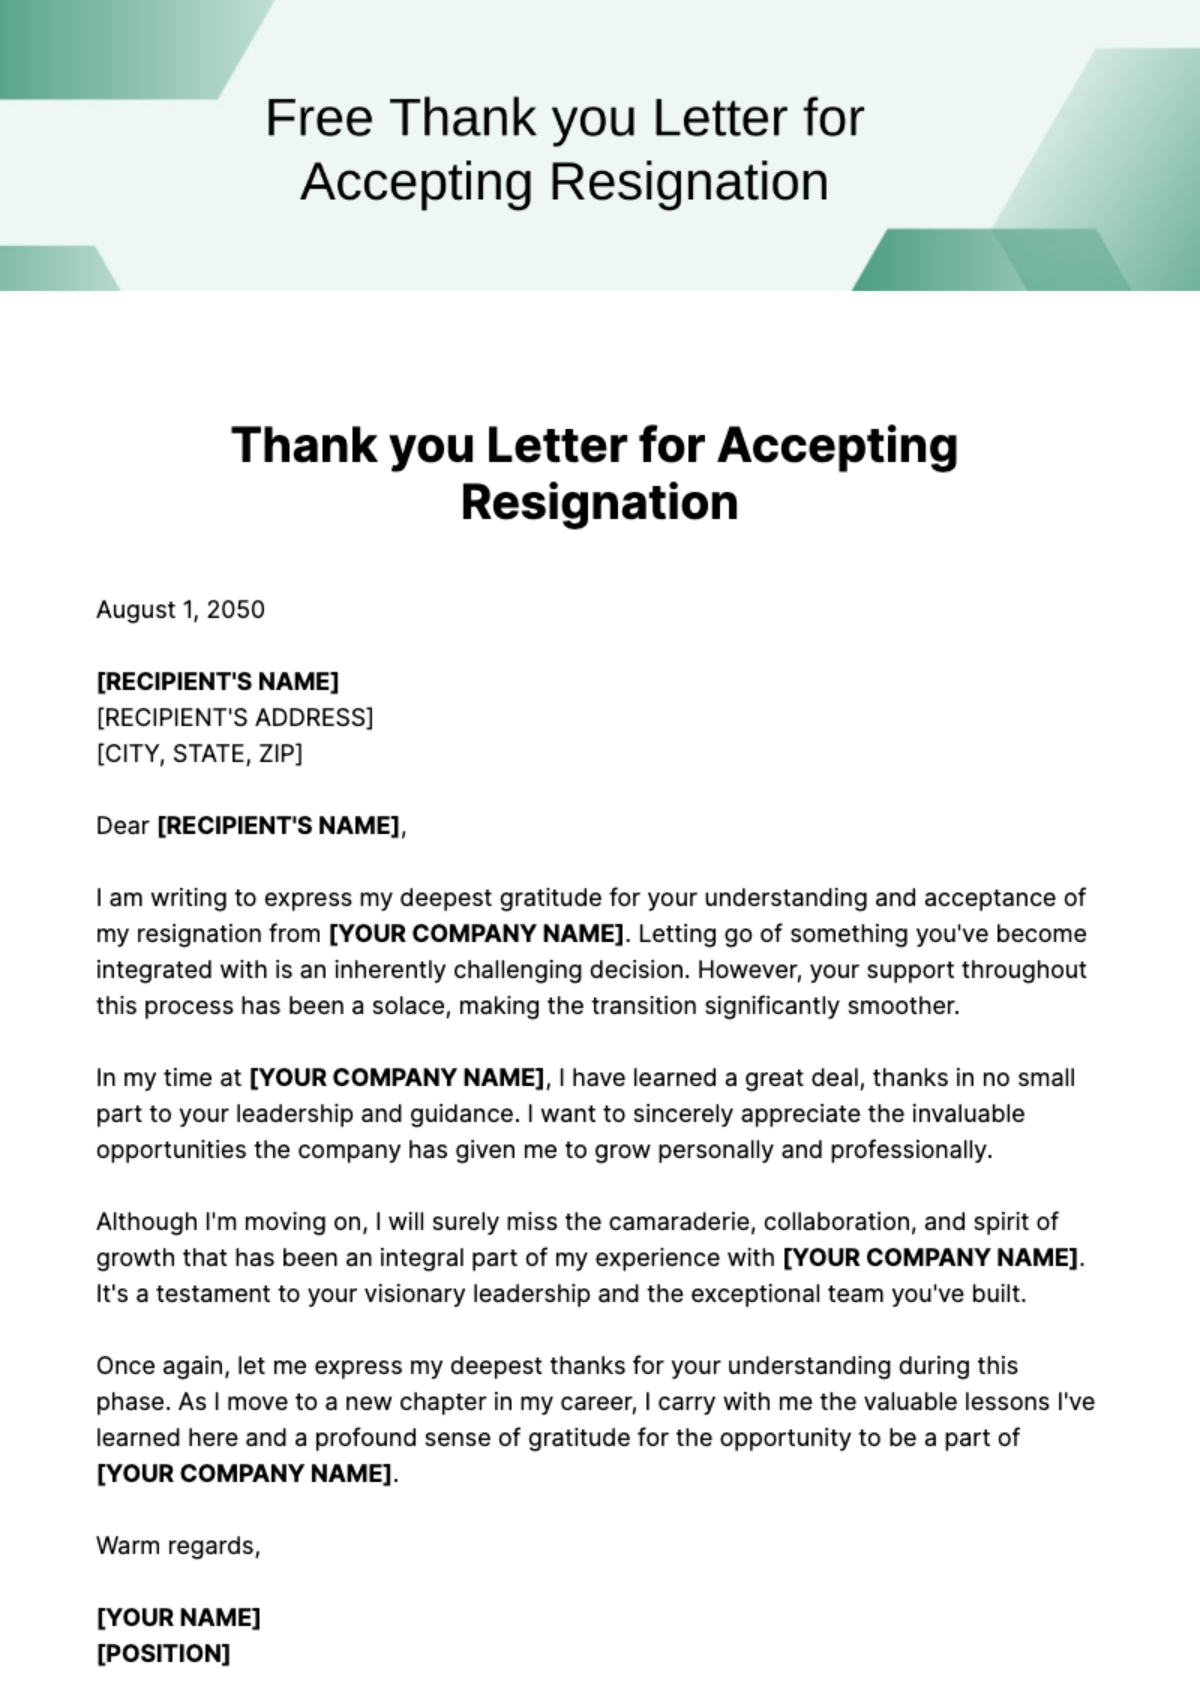 Thank you Letter for Accepting Resignation Template